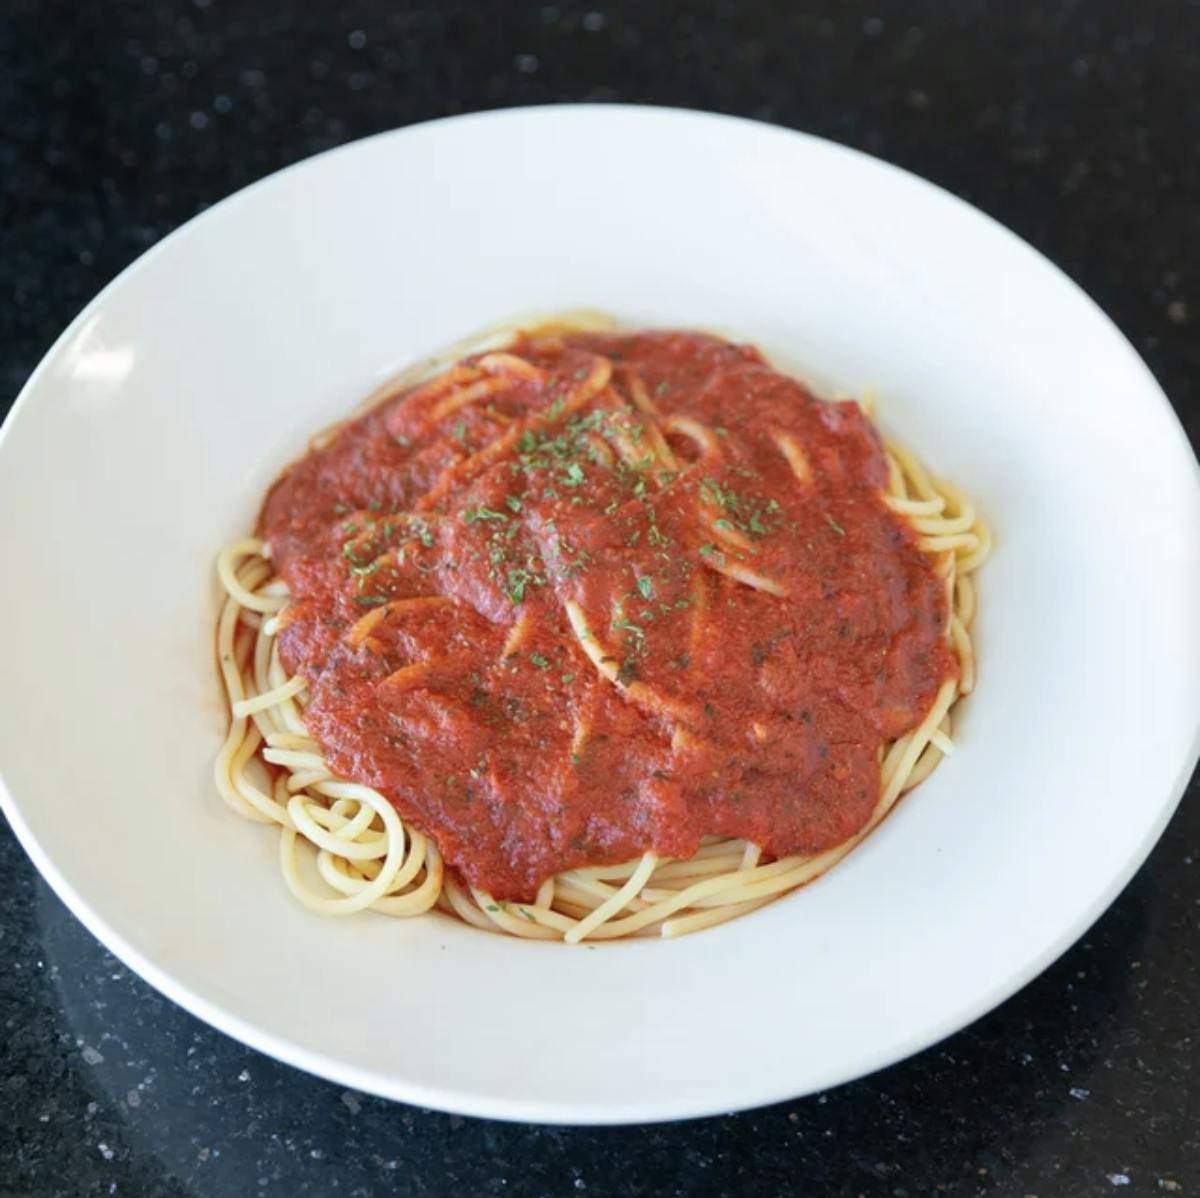 Spaghetti with Marinara from Aroma Pizza & Pasta in Lake Forest, CA